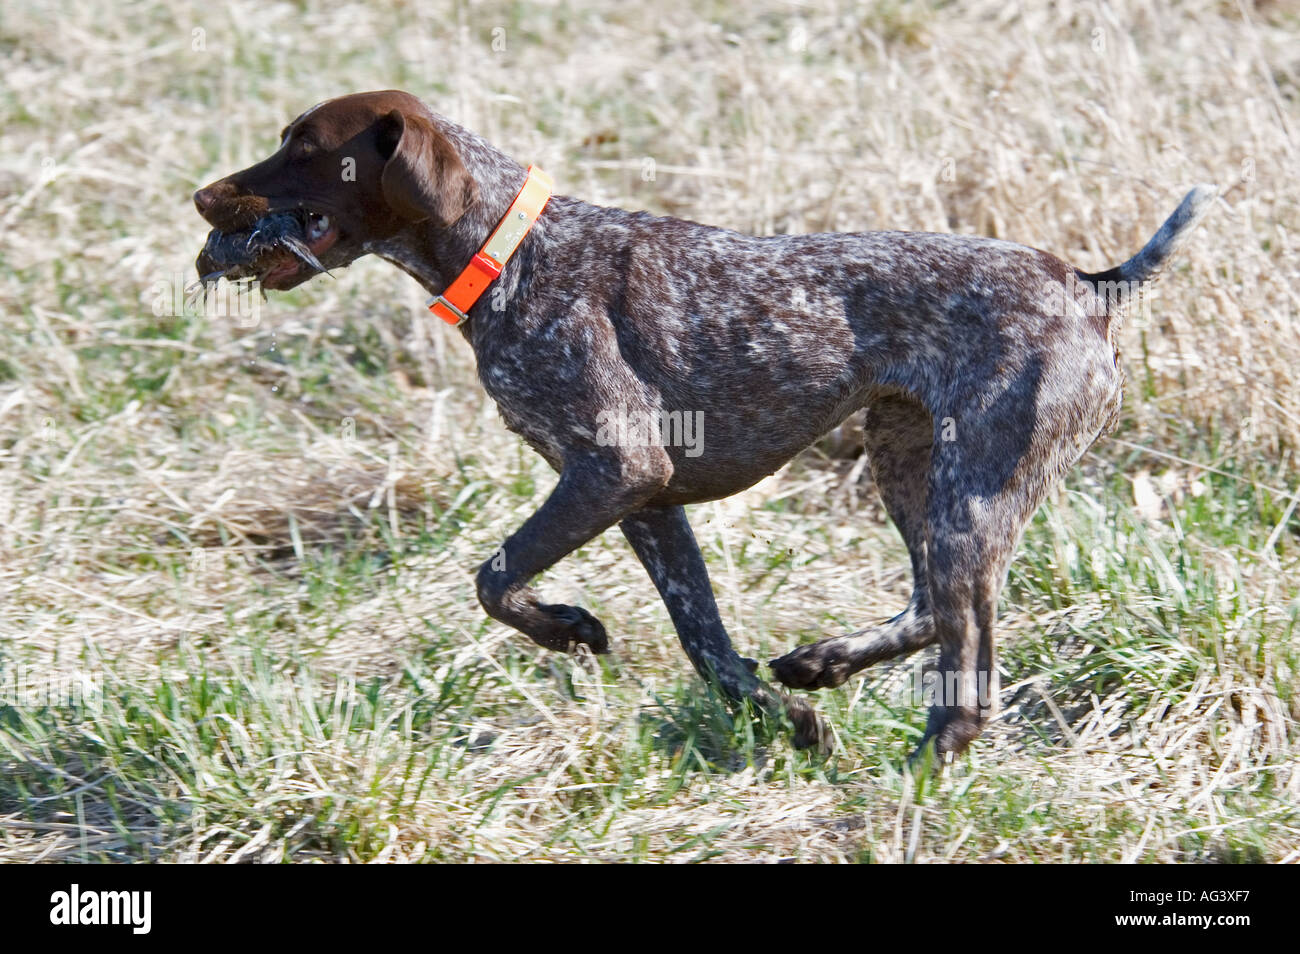 Page 11 - American Kennel Club High Resolution Stock Photography and Images  - Alamy